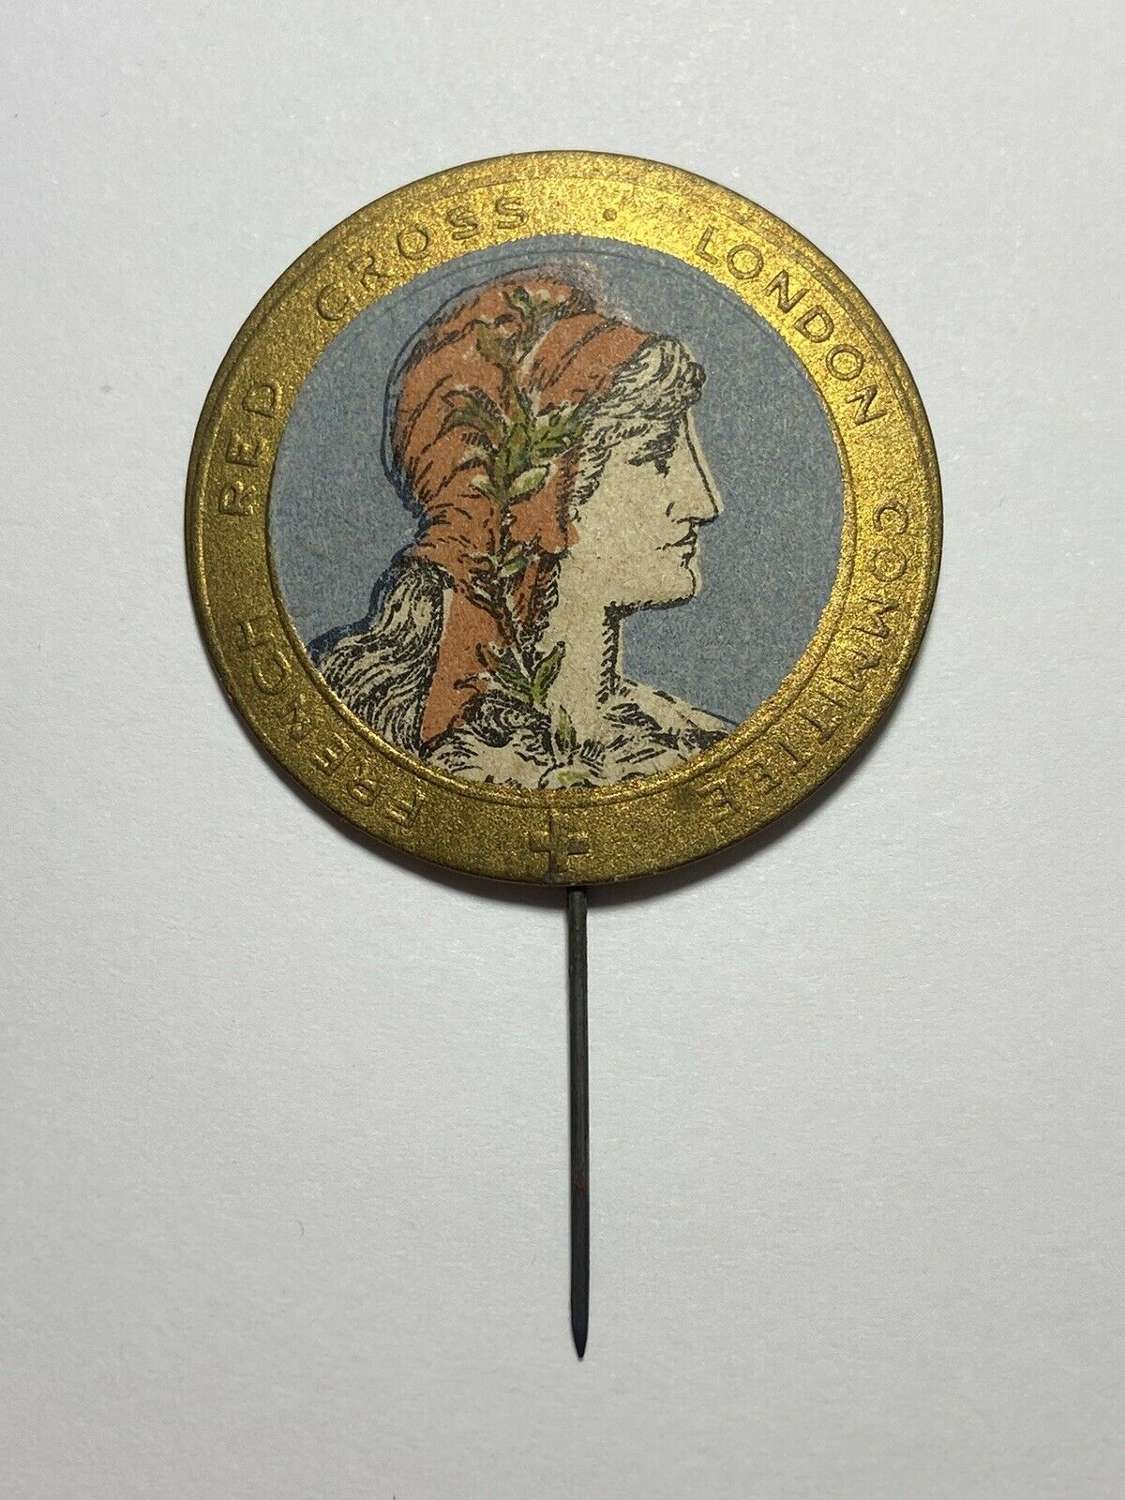 WW1 Paper Pin Badge Fundraising Pin French red cross London committee